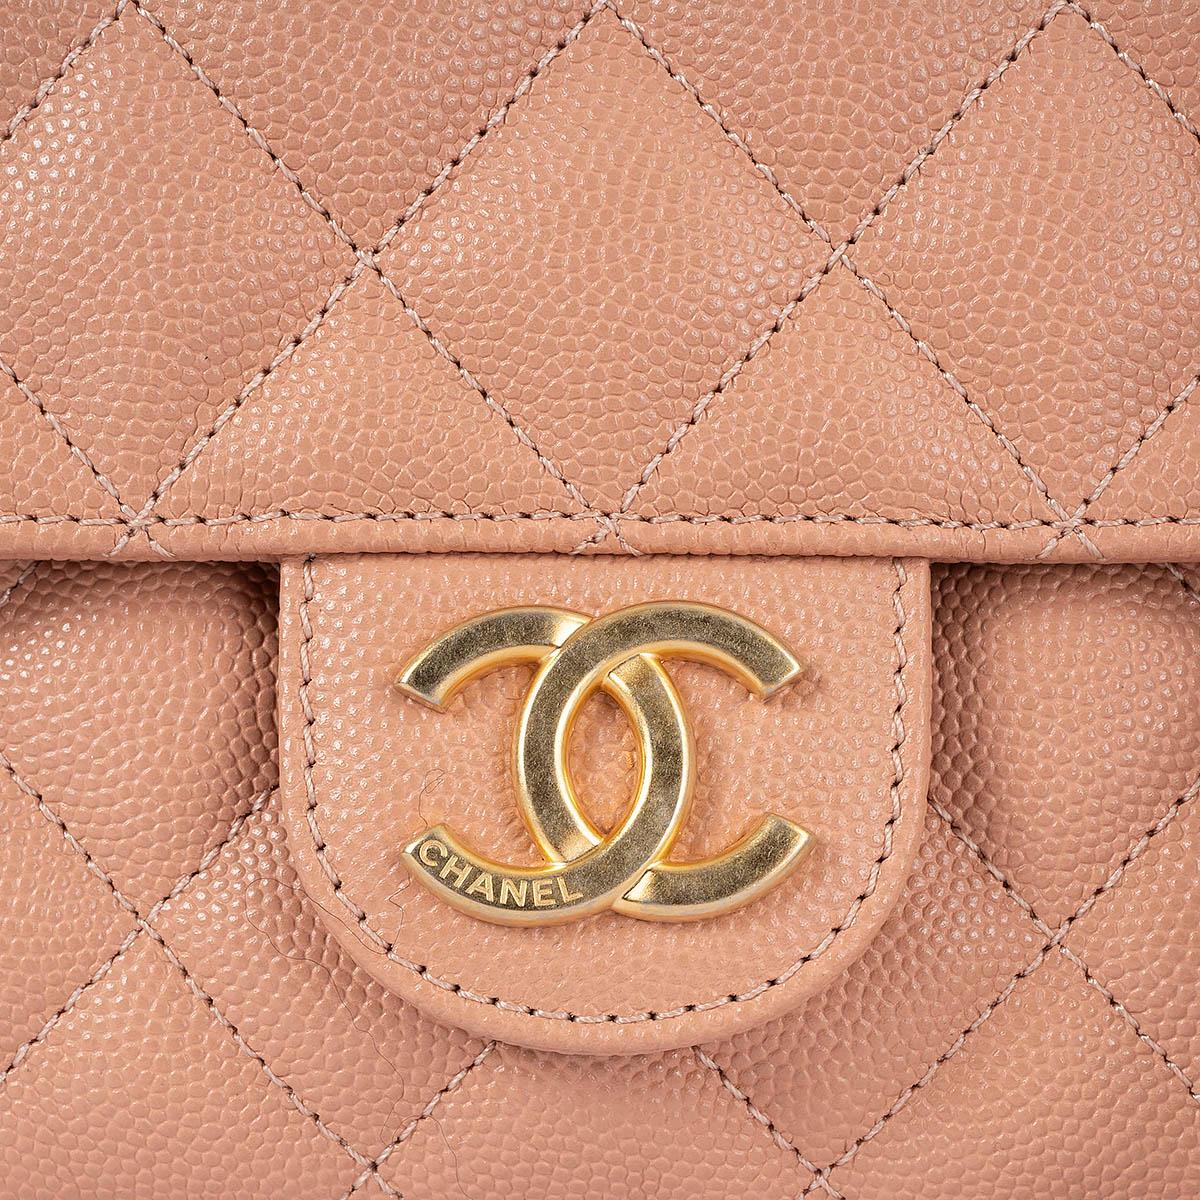 CHANEL beige peach Caviar leather SMALL WAVY HOBO Shoulder Bag NM375 For Sale 2